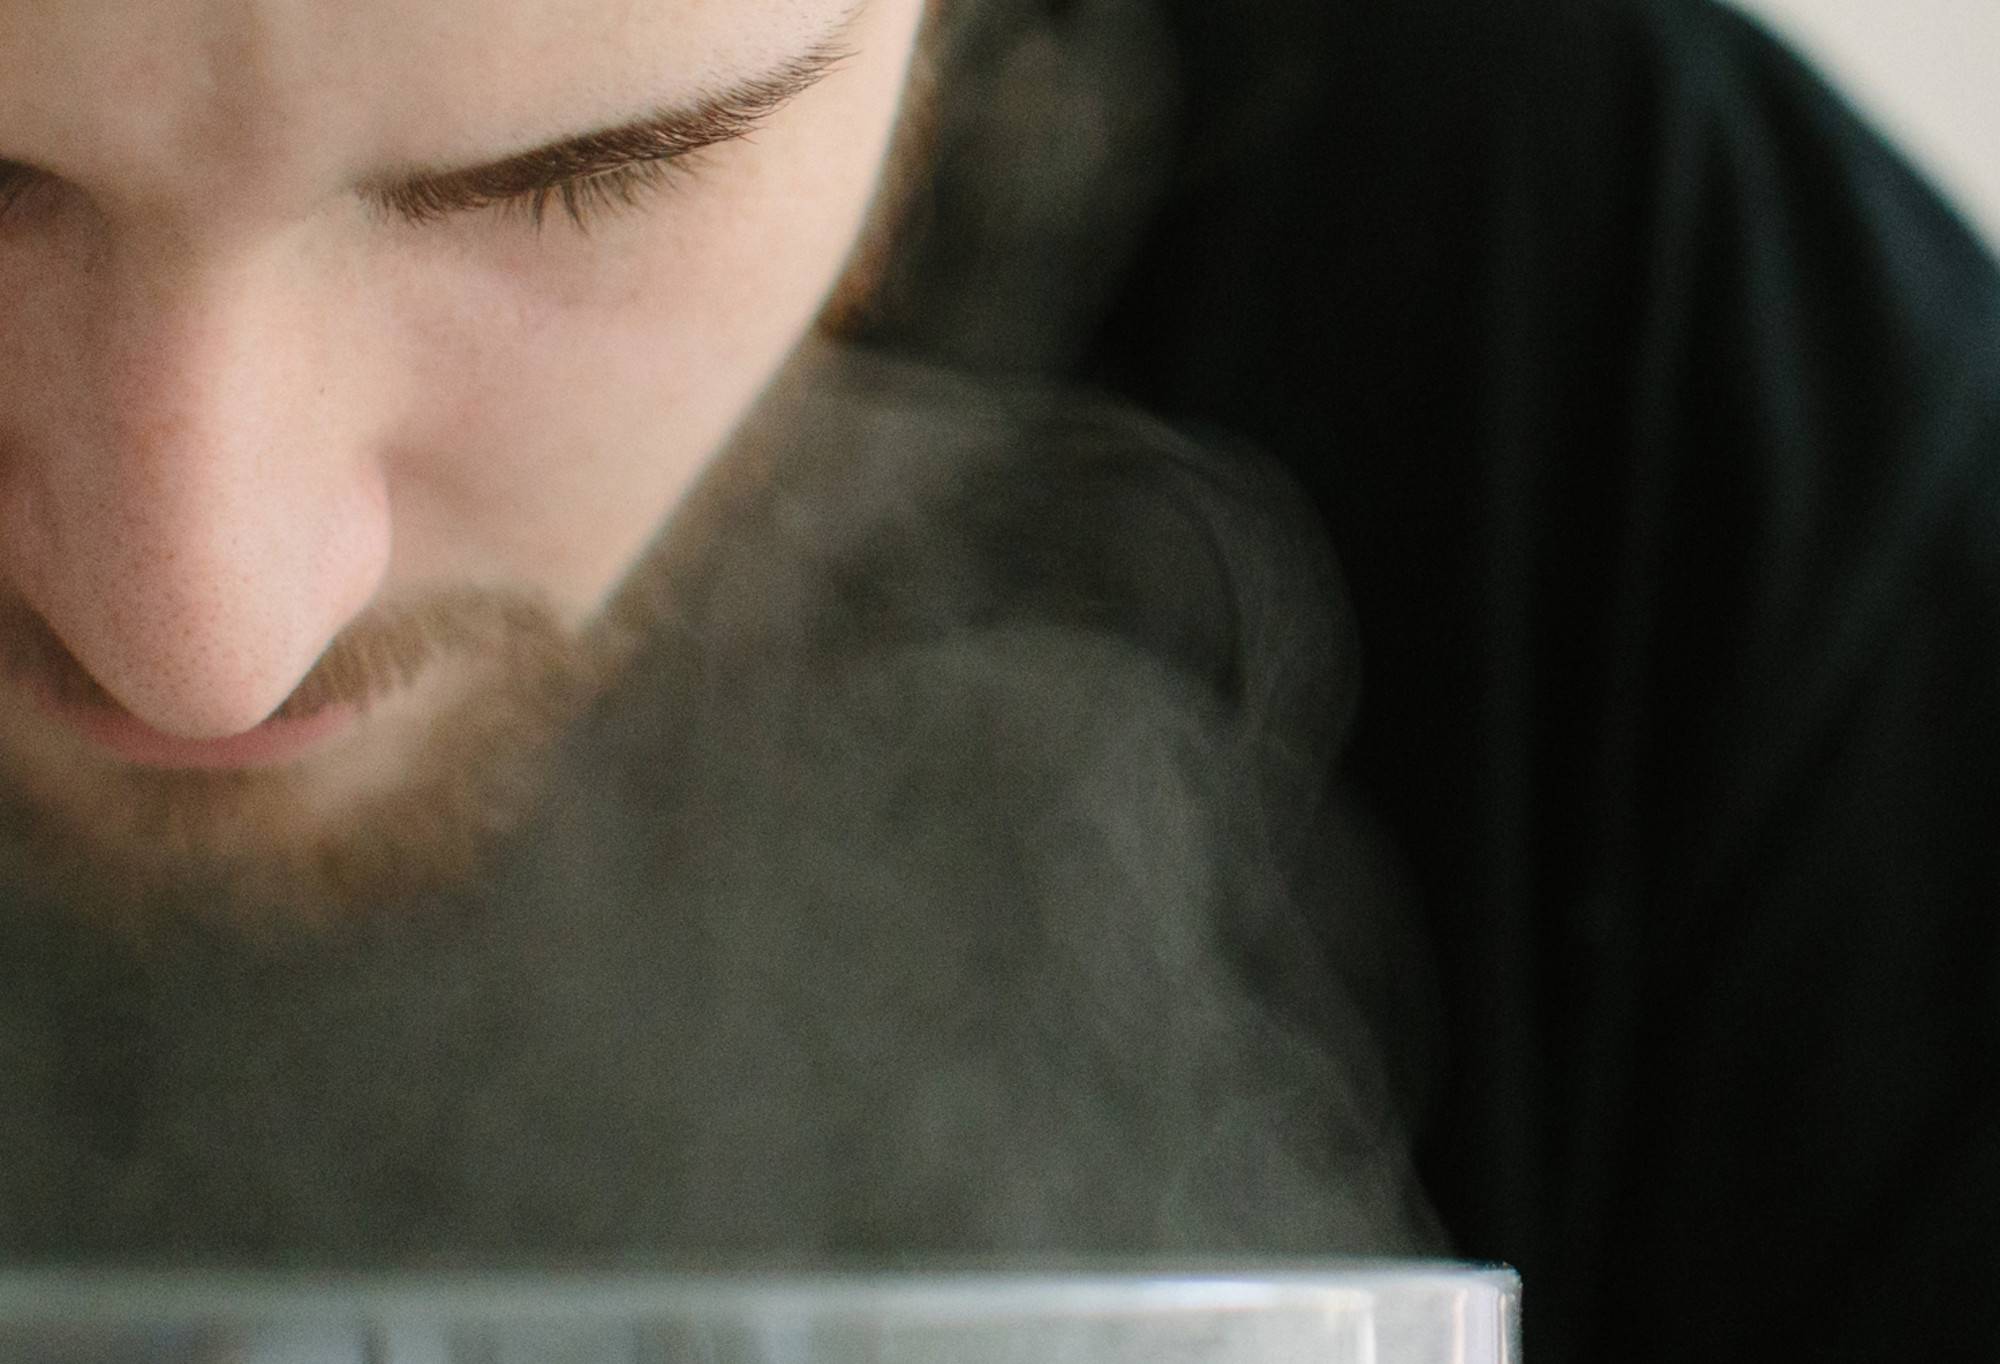 A bearded person hovers their face above a steaming bowl, looking focused yet relaxed.